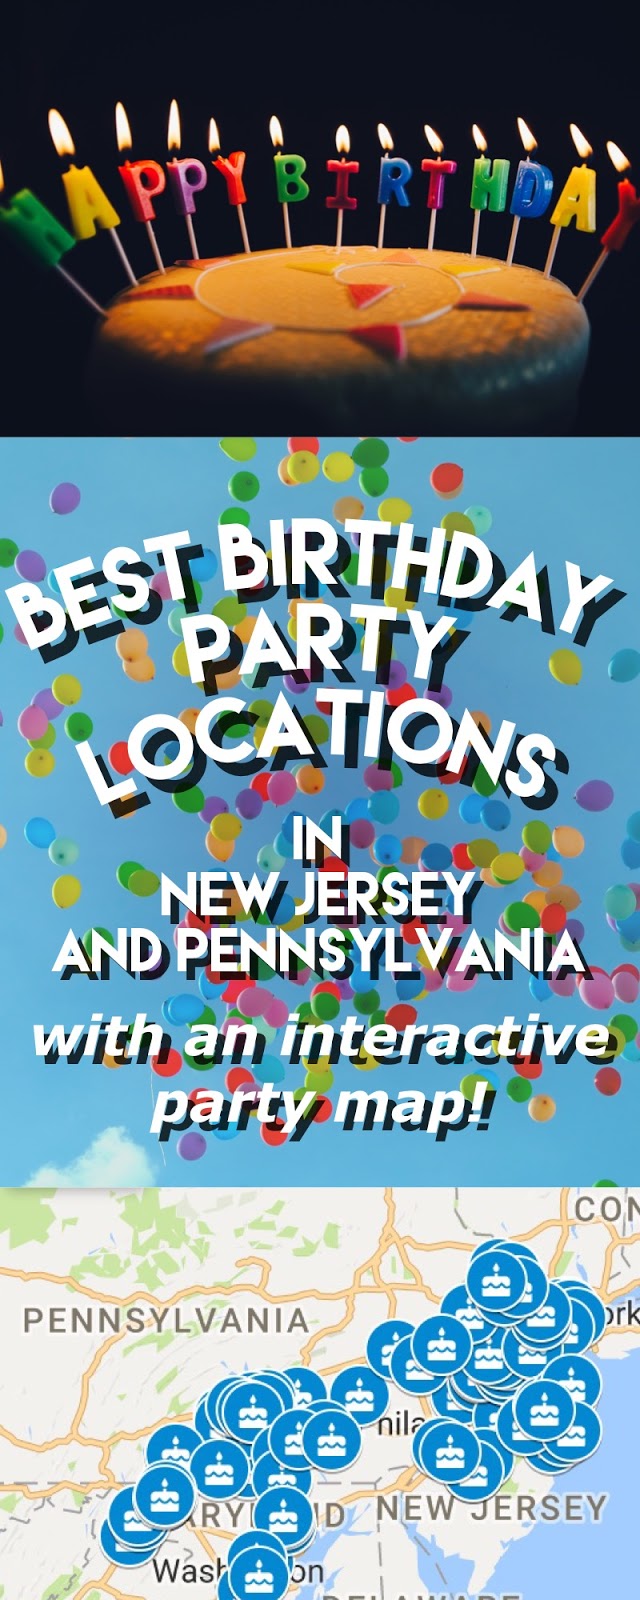 Hot New Nj Birthday Party Spots To Celebrate In 2020 Mommypoppins Things To Do In New Jersey With Kids